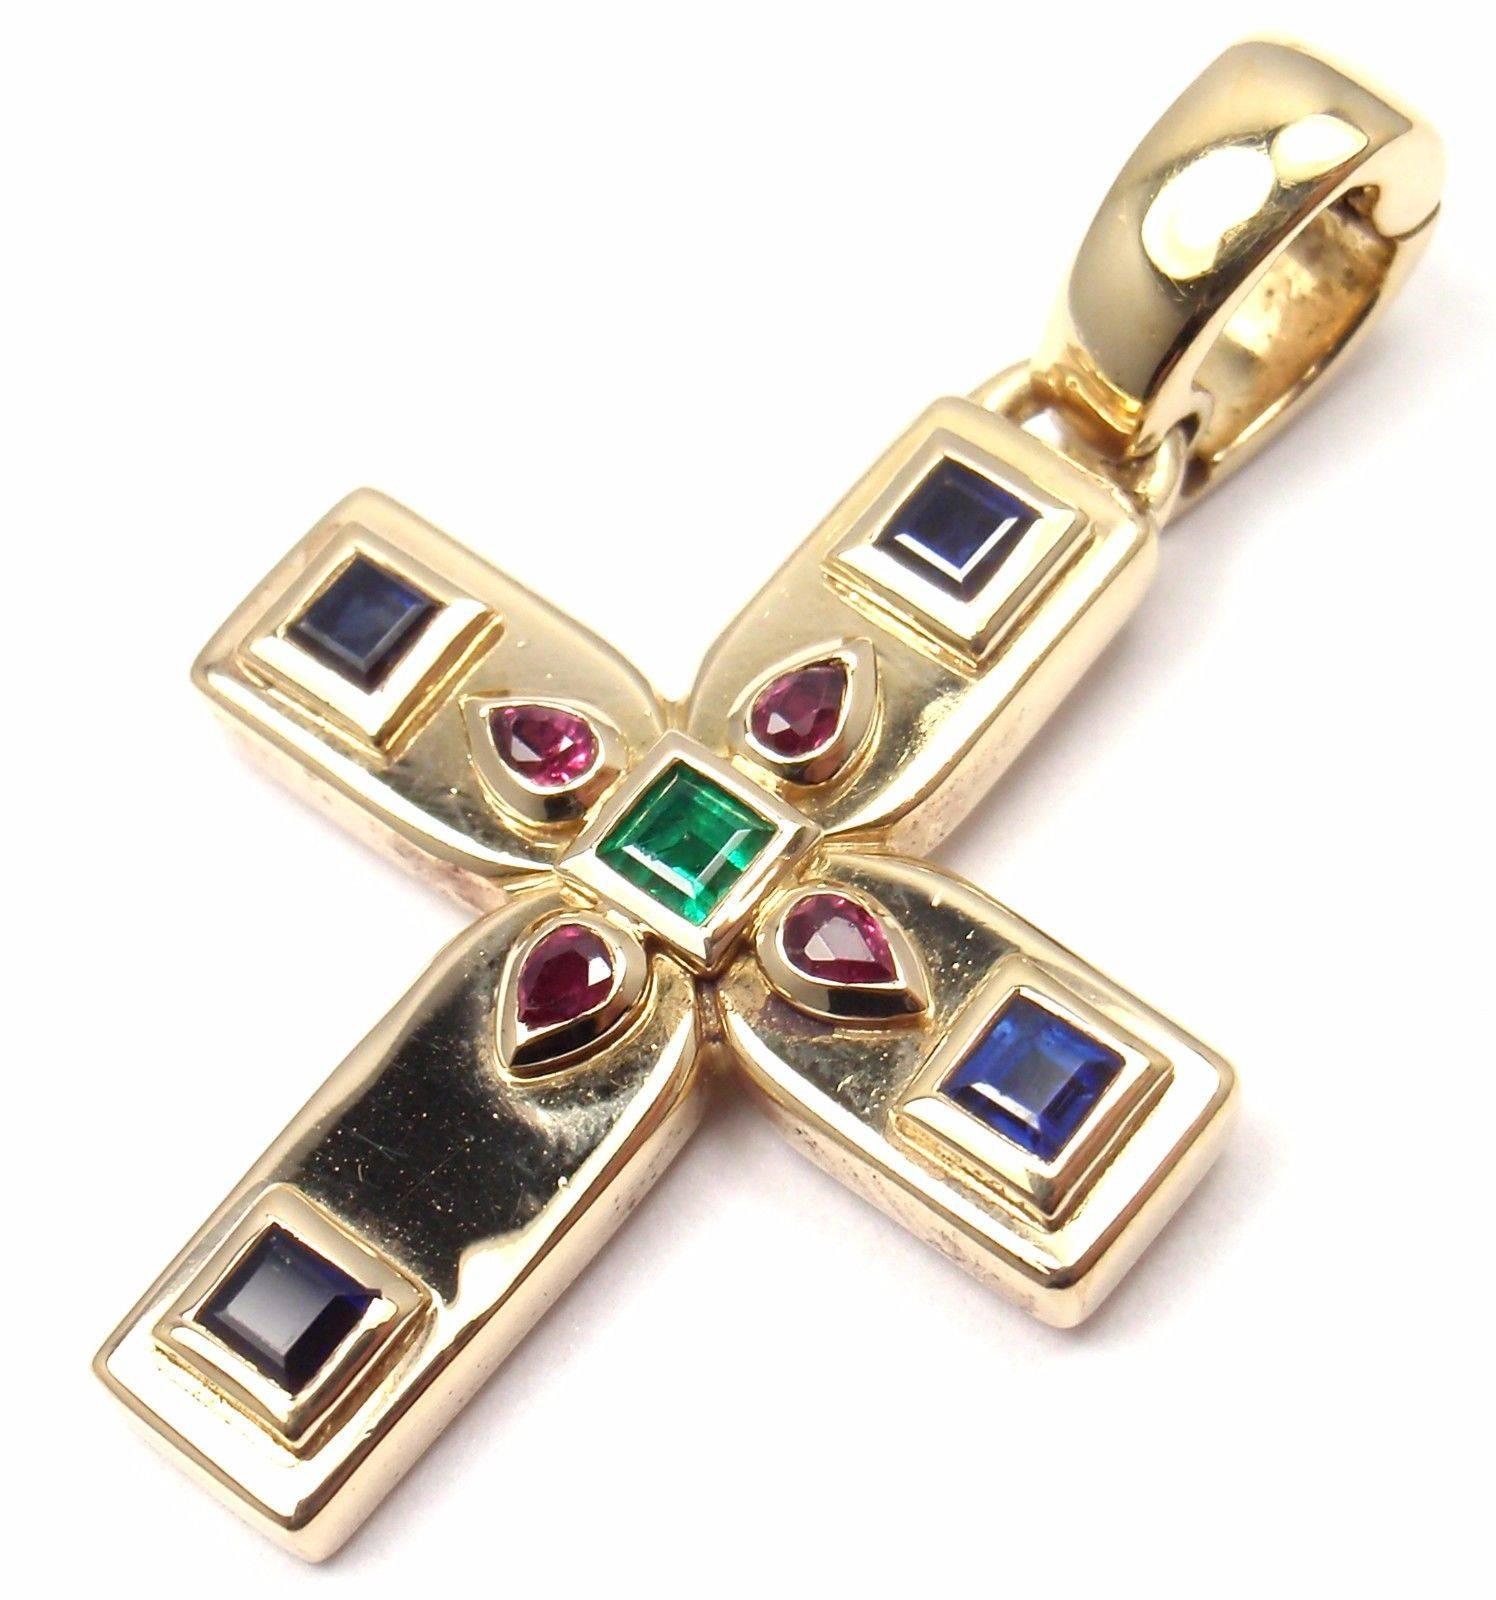 18k Yellow Gold Vizantija Cross Sapphire, Ruby, and Emerald Pendant by Cartier. 

Stones: 
a. 4 Princess Cut Sapphires, Total Weight: .16ct
b. 4 Pear Shape Rubies, Total Weight: .06ct
c. 1 Emerald, .04ct

Details: 
Measurements:	30mm x